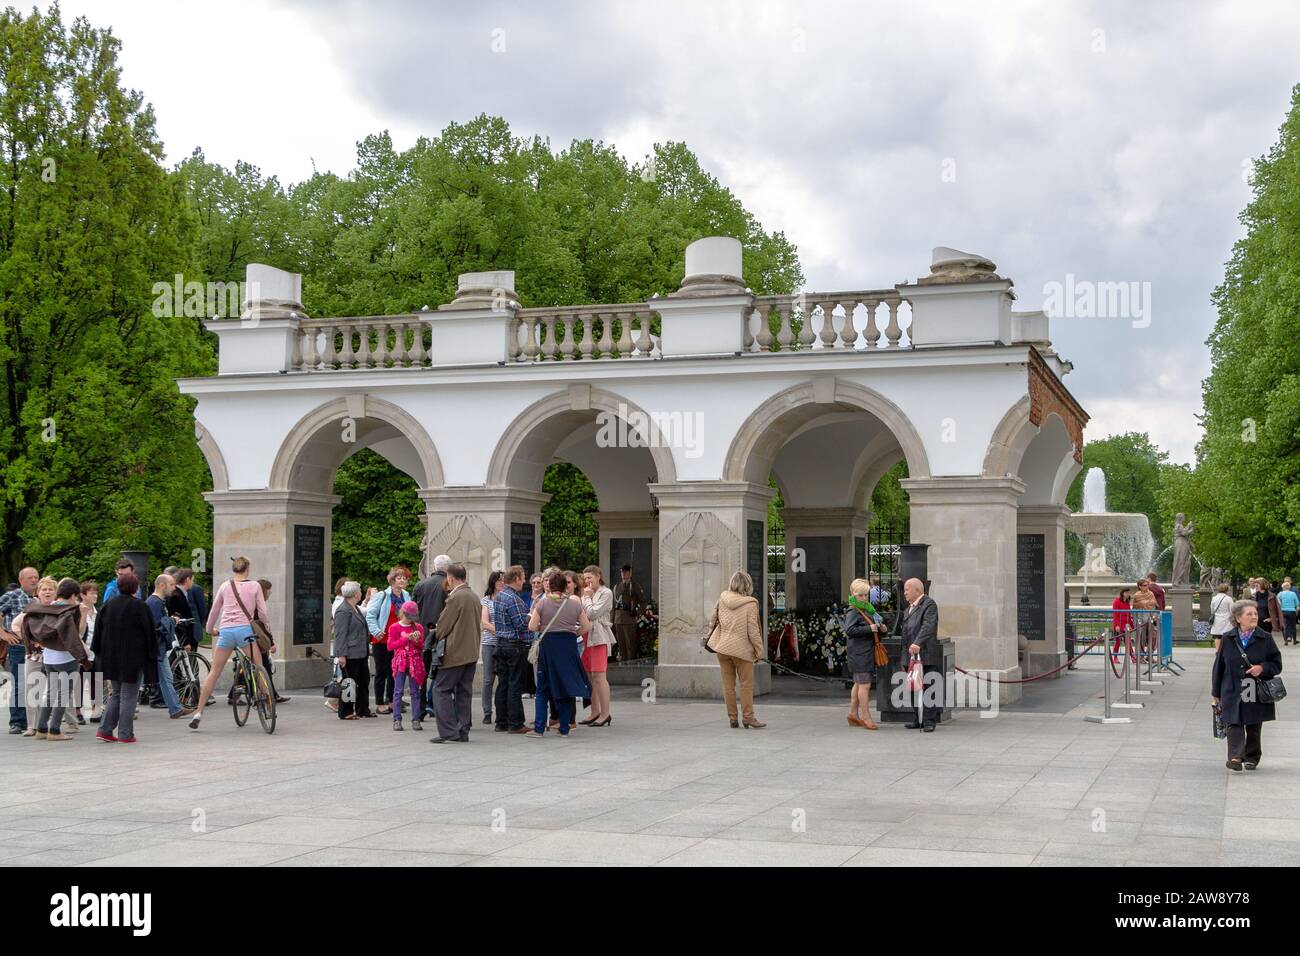 People standing before the Tomb of the Unknown Soldier in Warsaw, Poland Stock Photo